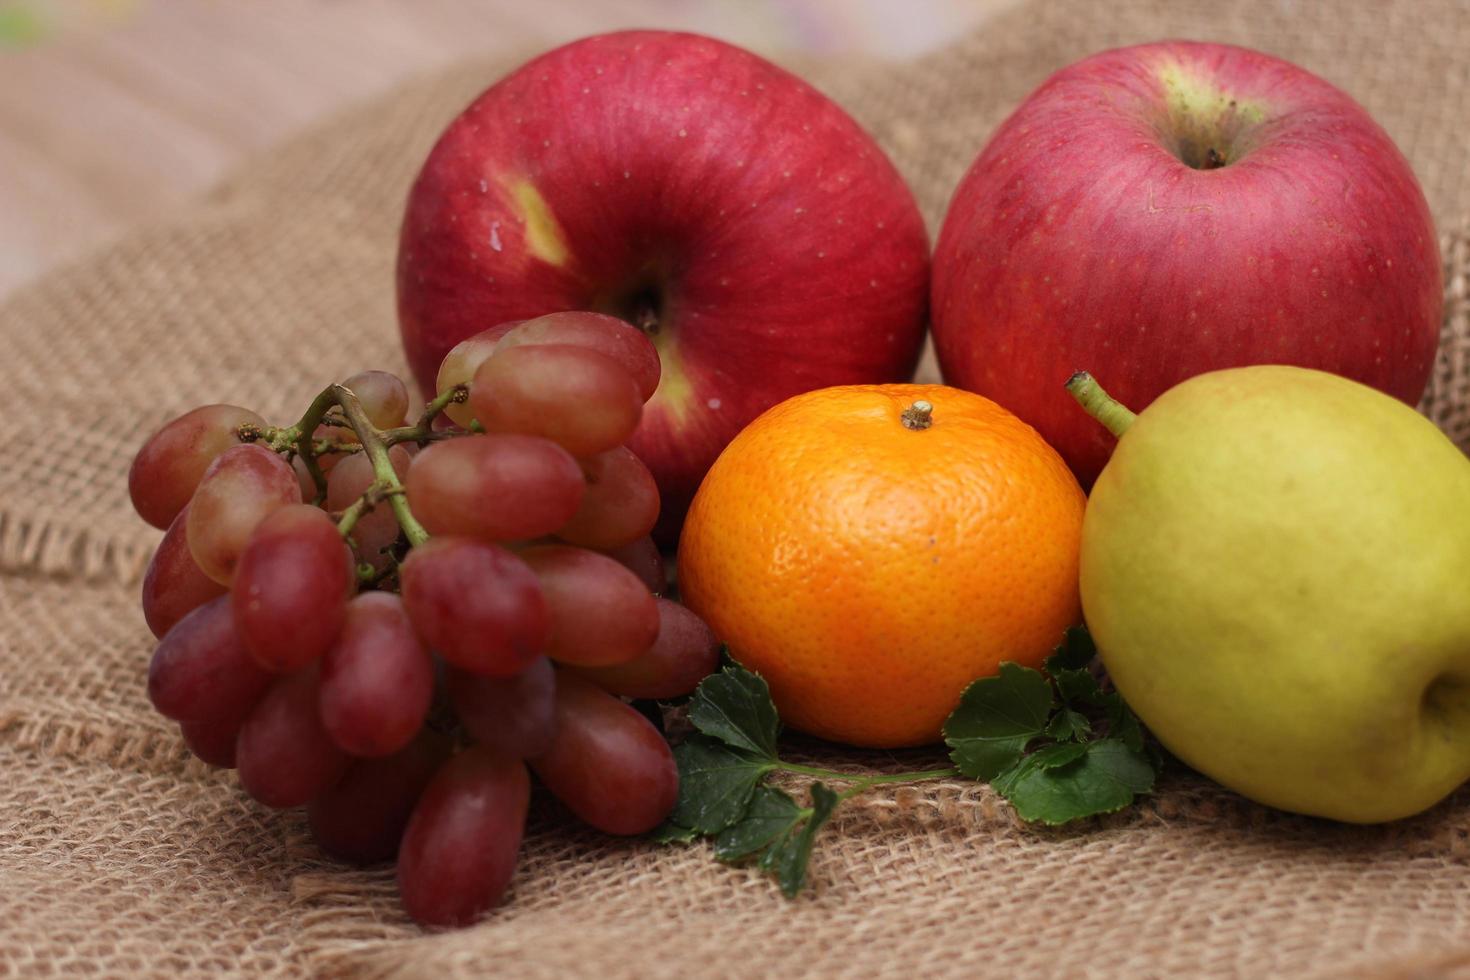 Fruits with vitamin C that are beneficial to the body. Place on sackcloth - orange, grape, apple, guava photo